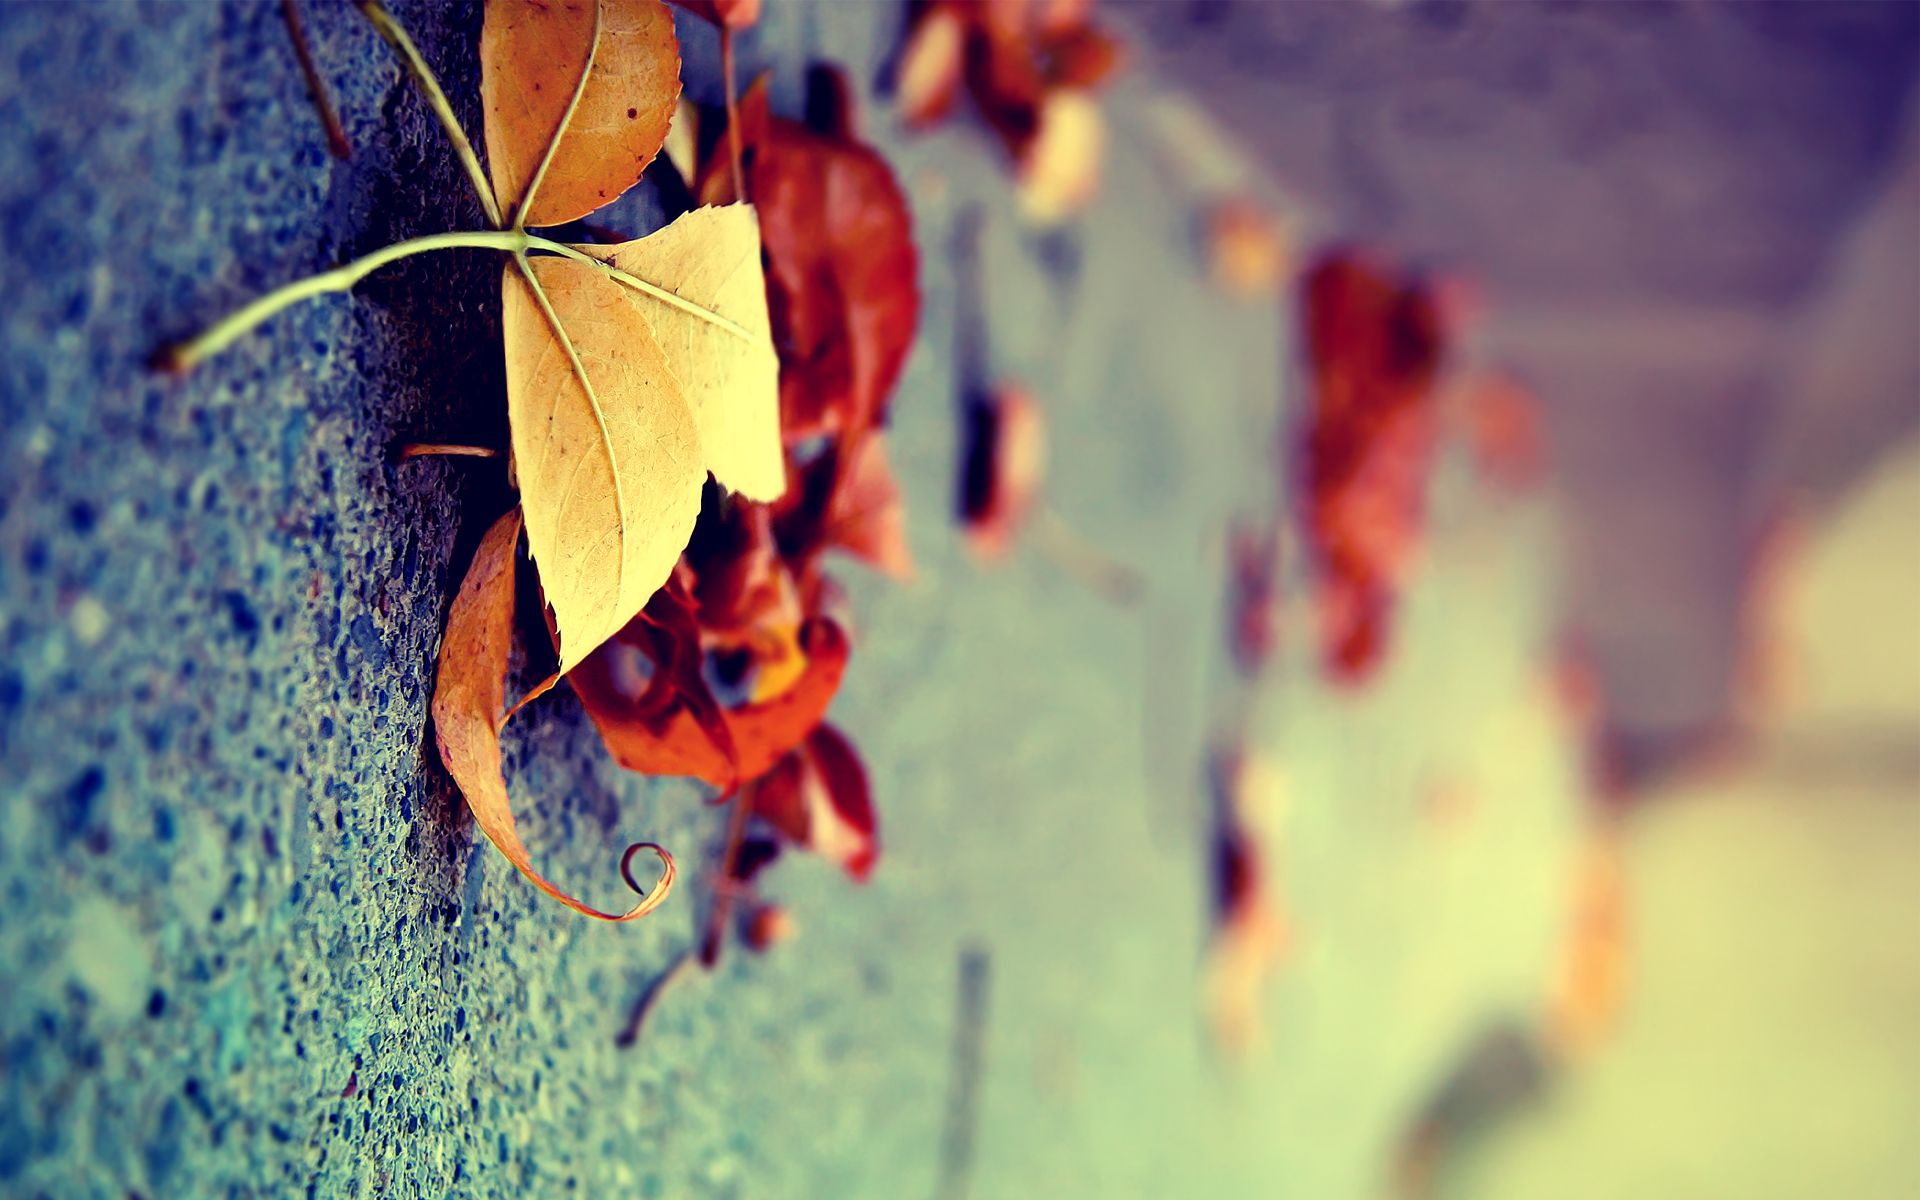  of cold weather wallpaper of the Golden time autumn For Desktop